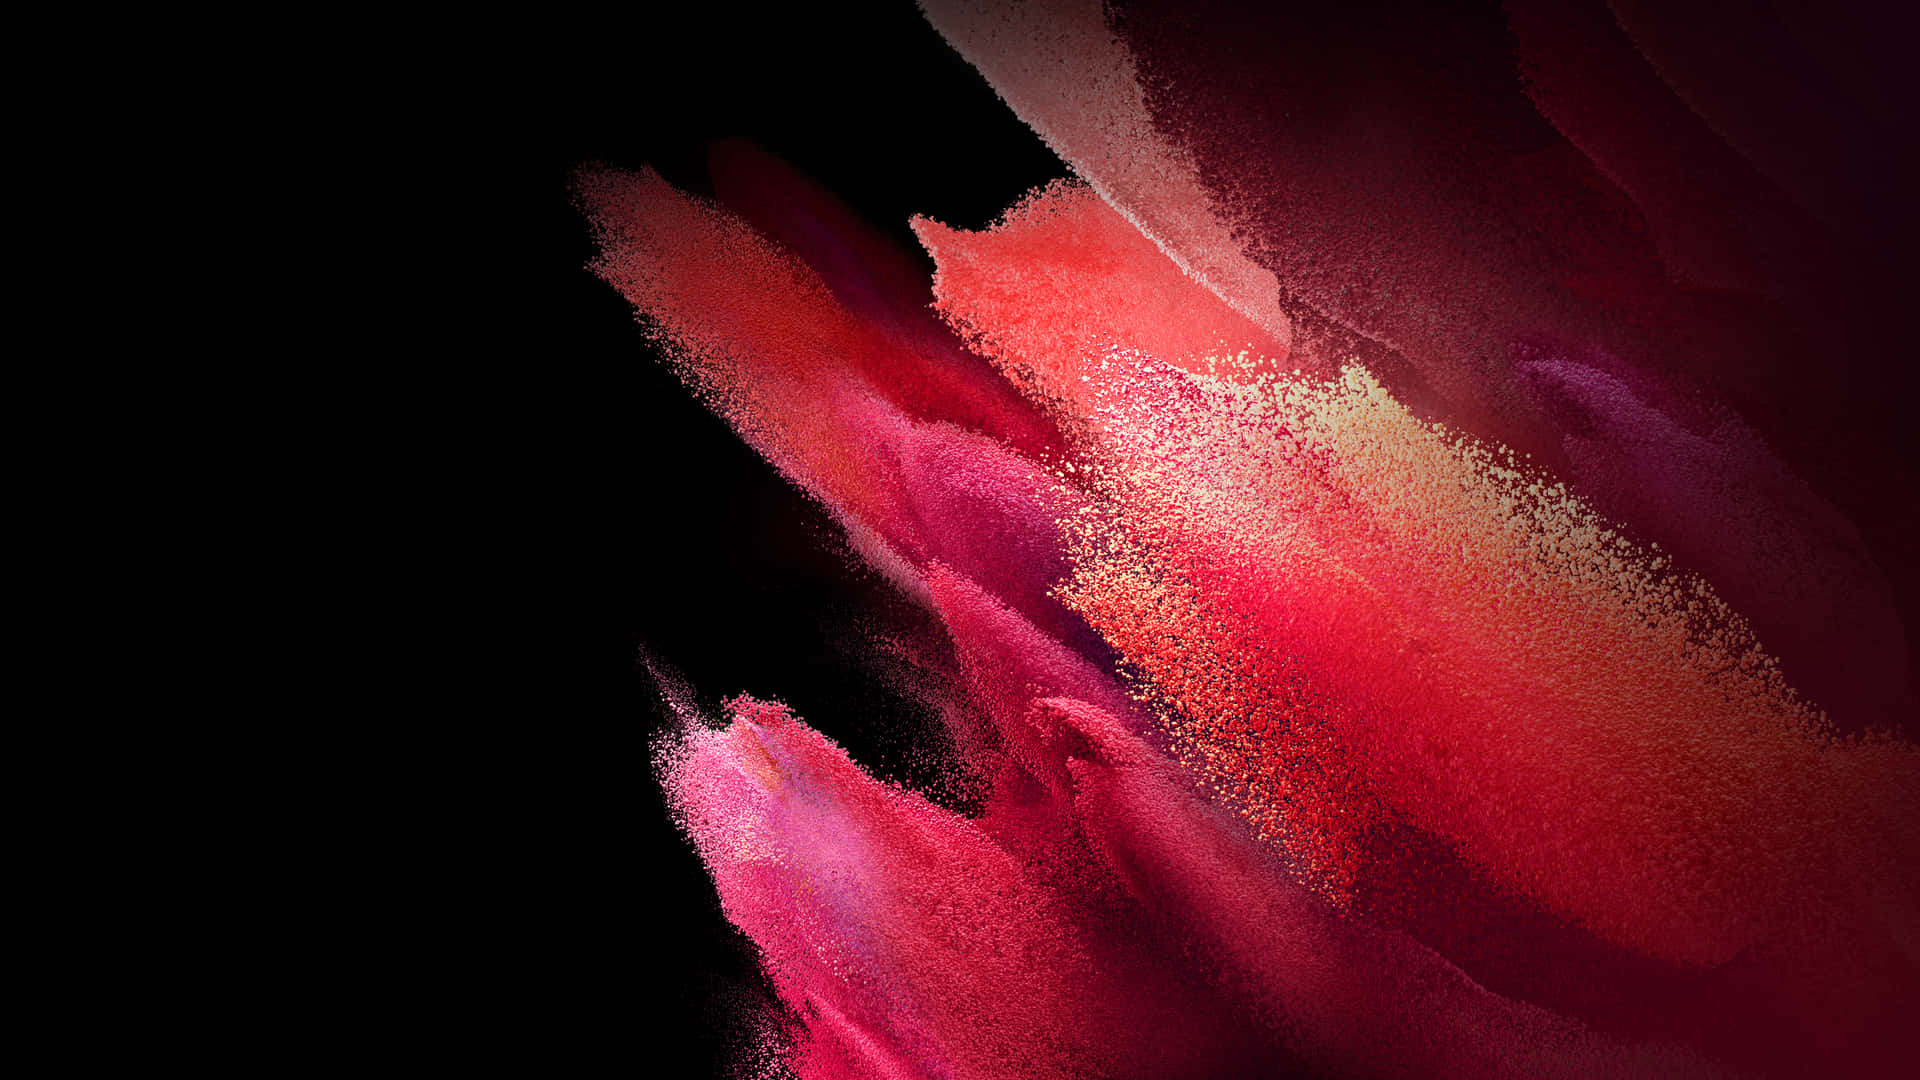 These Red Colors Wallpaper